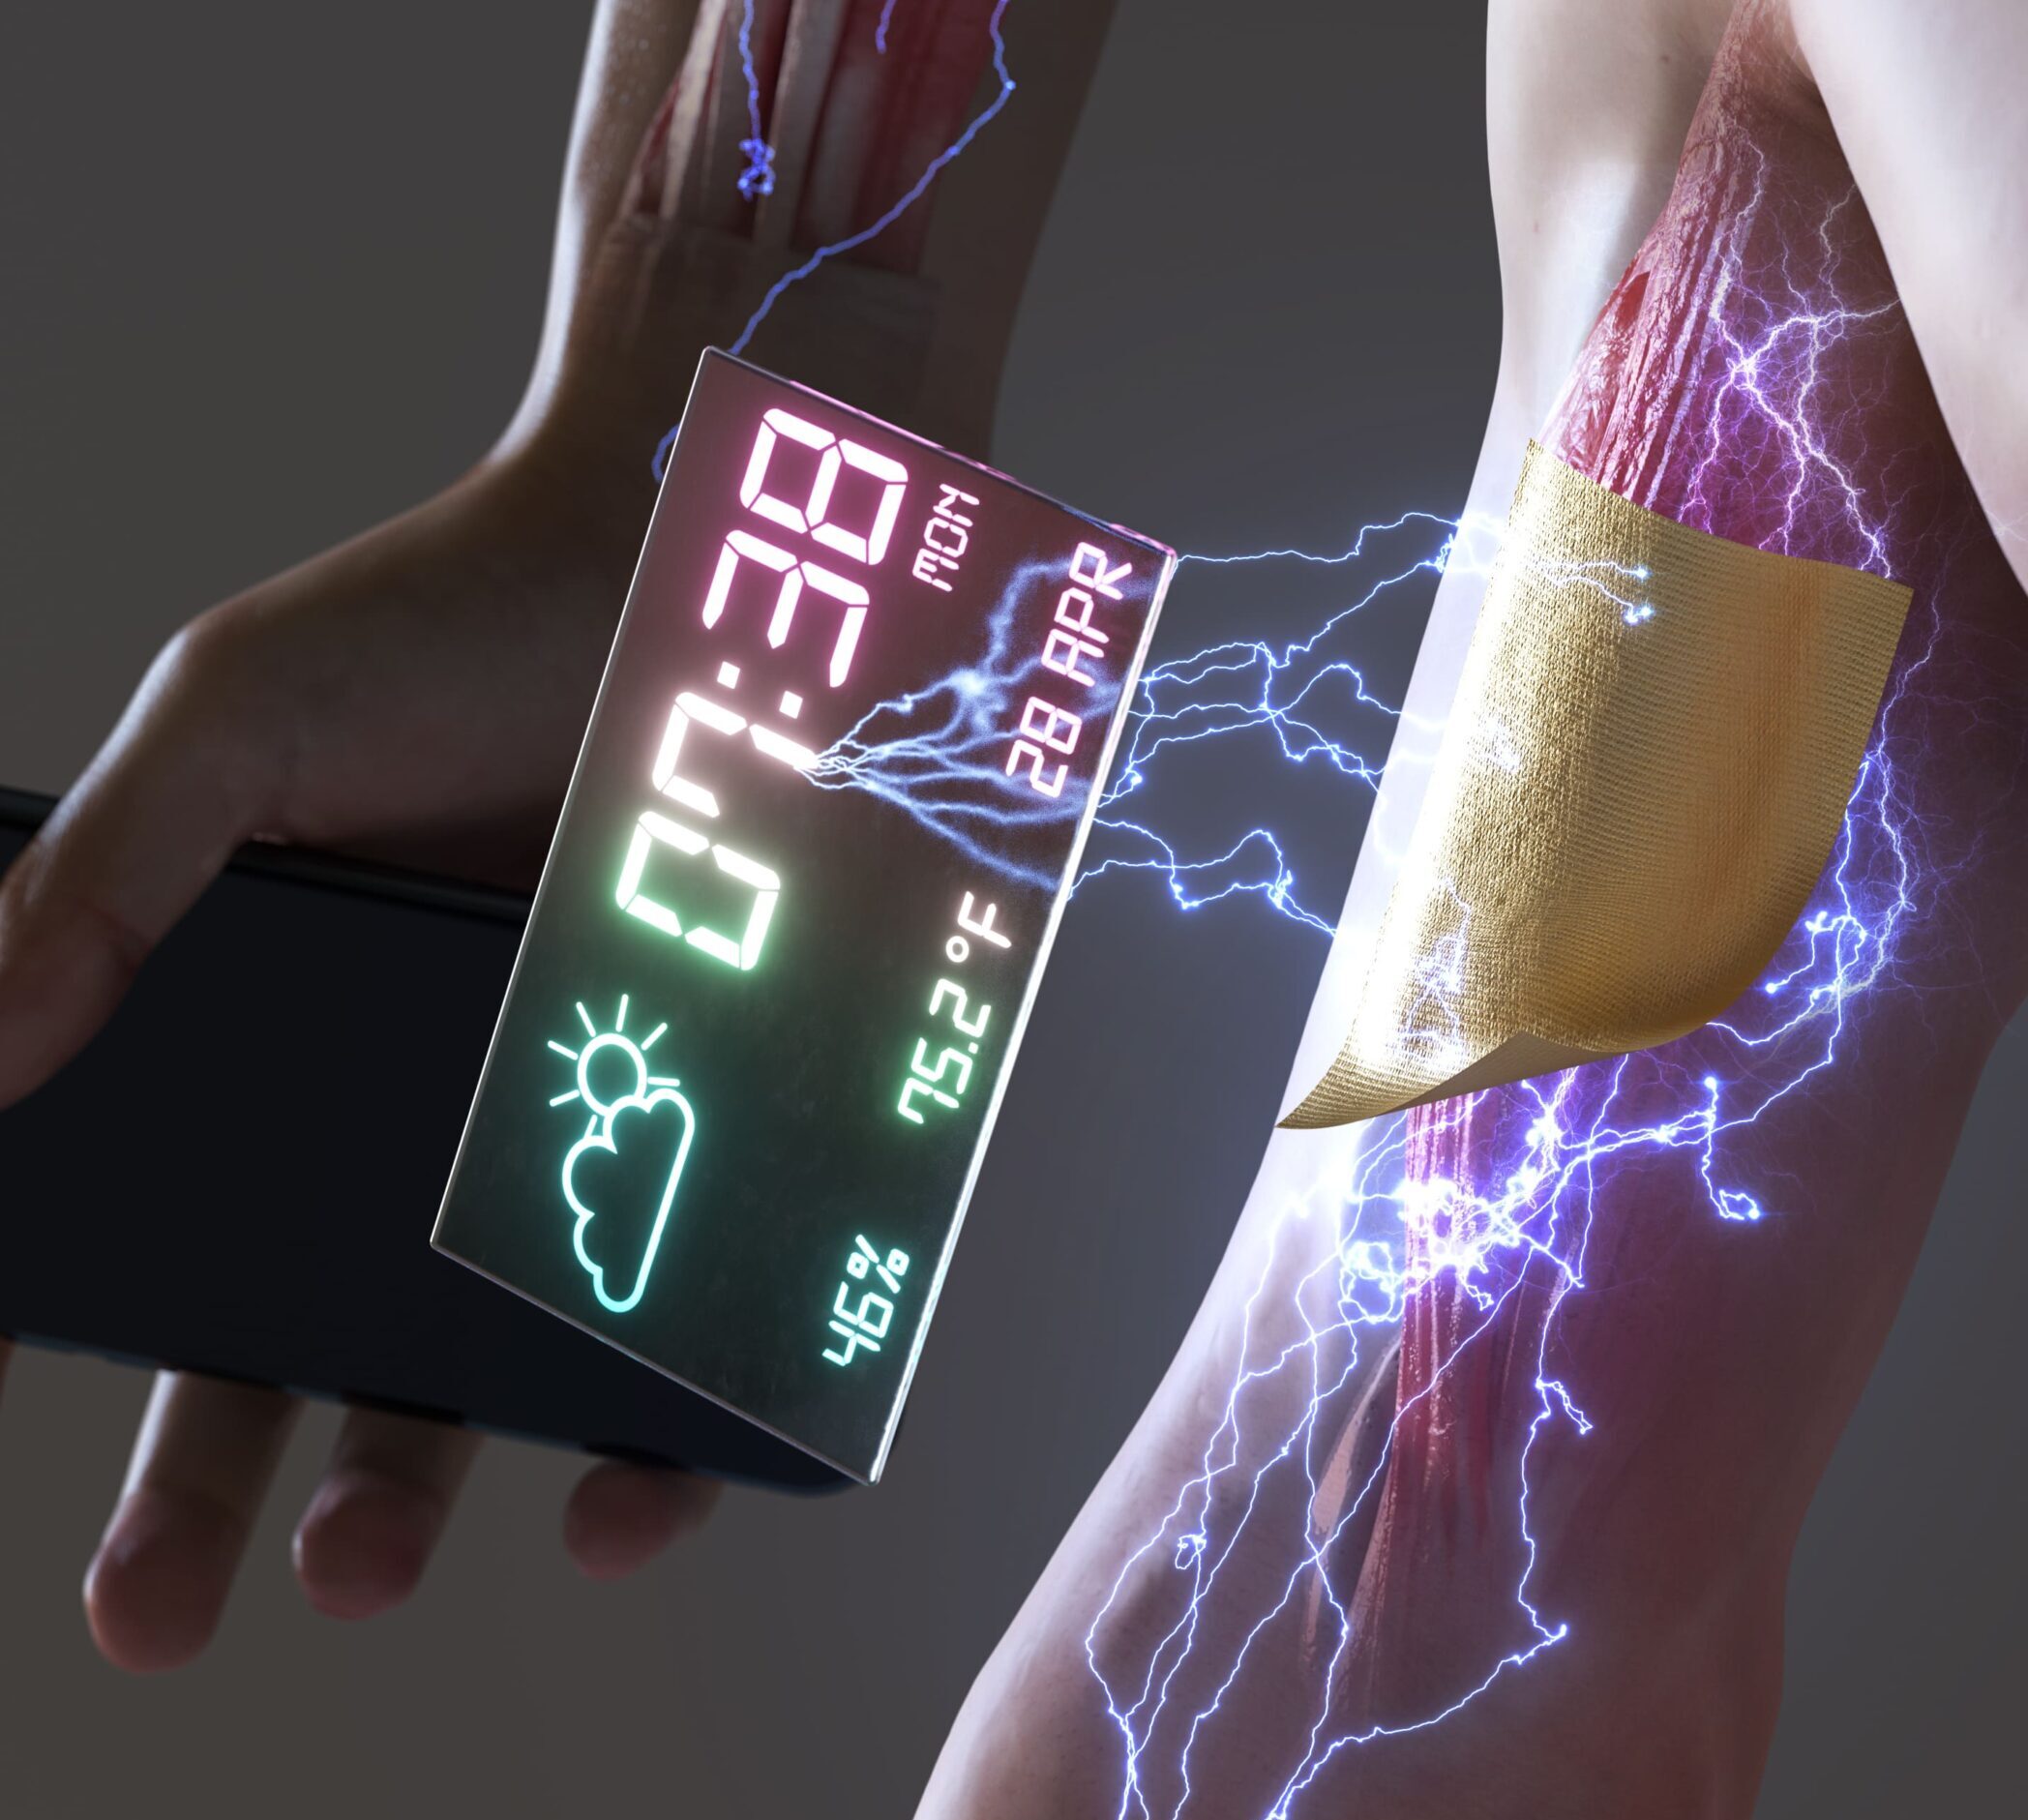 Harnessing Bodily Energy for Wearable Technology and Wellness